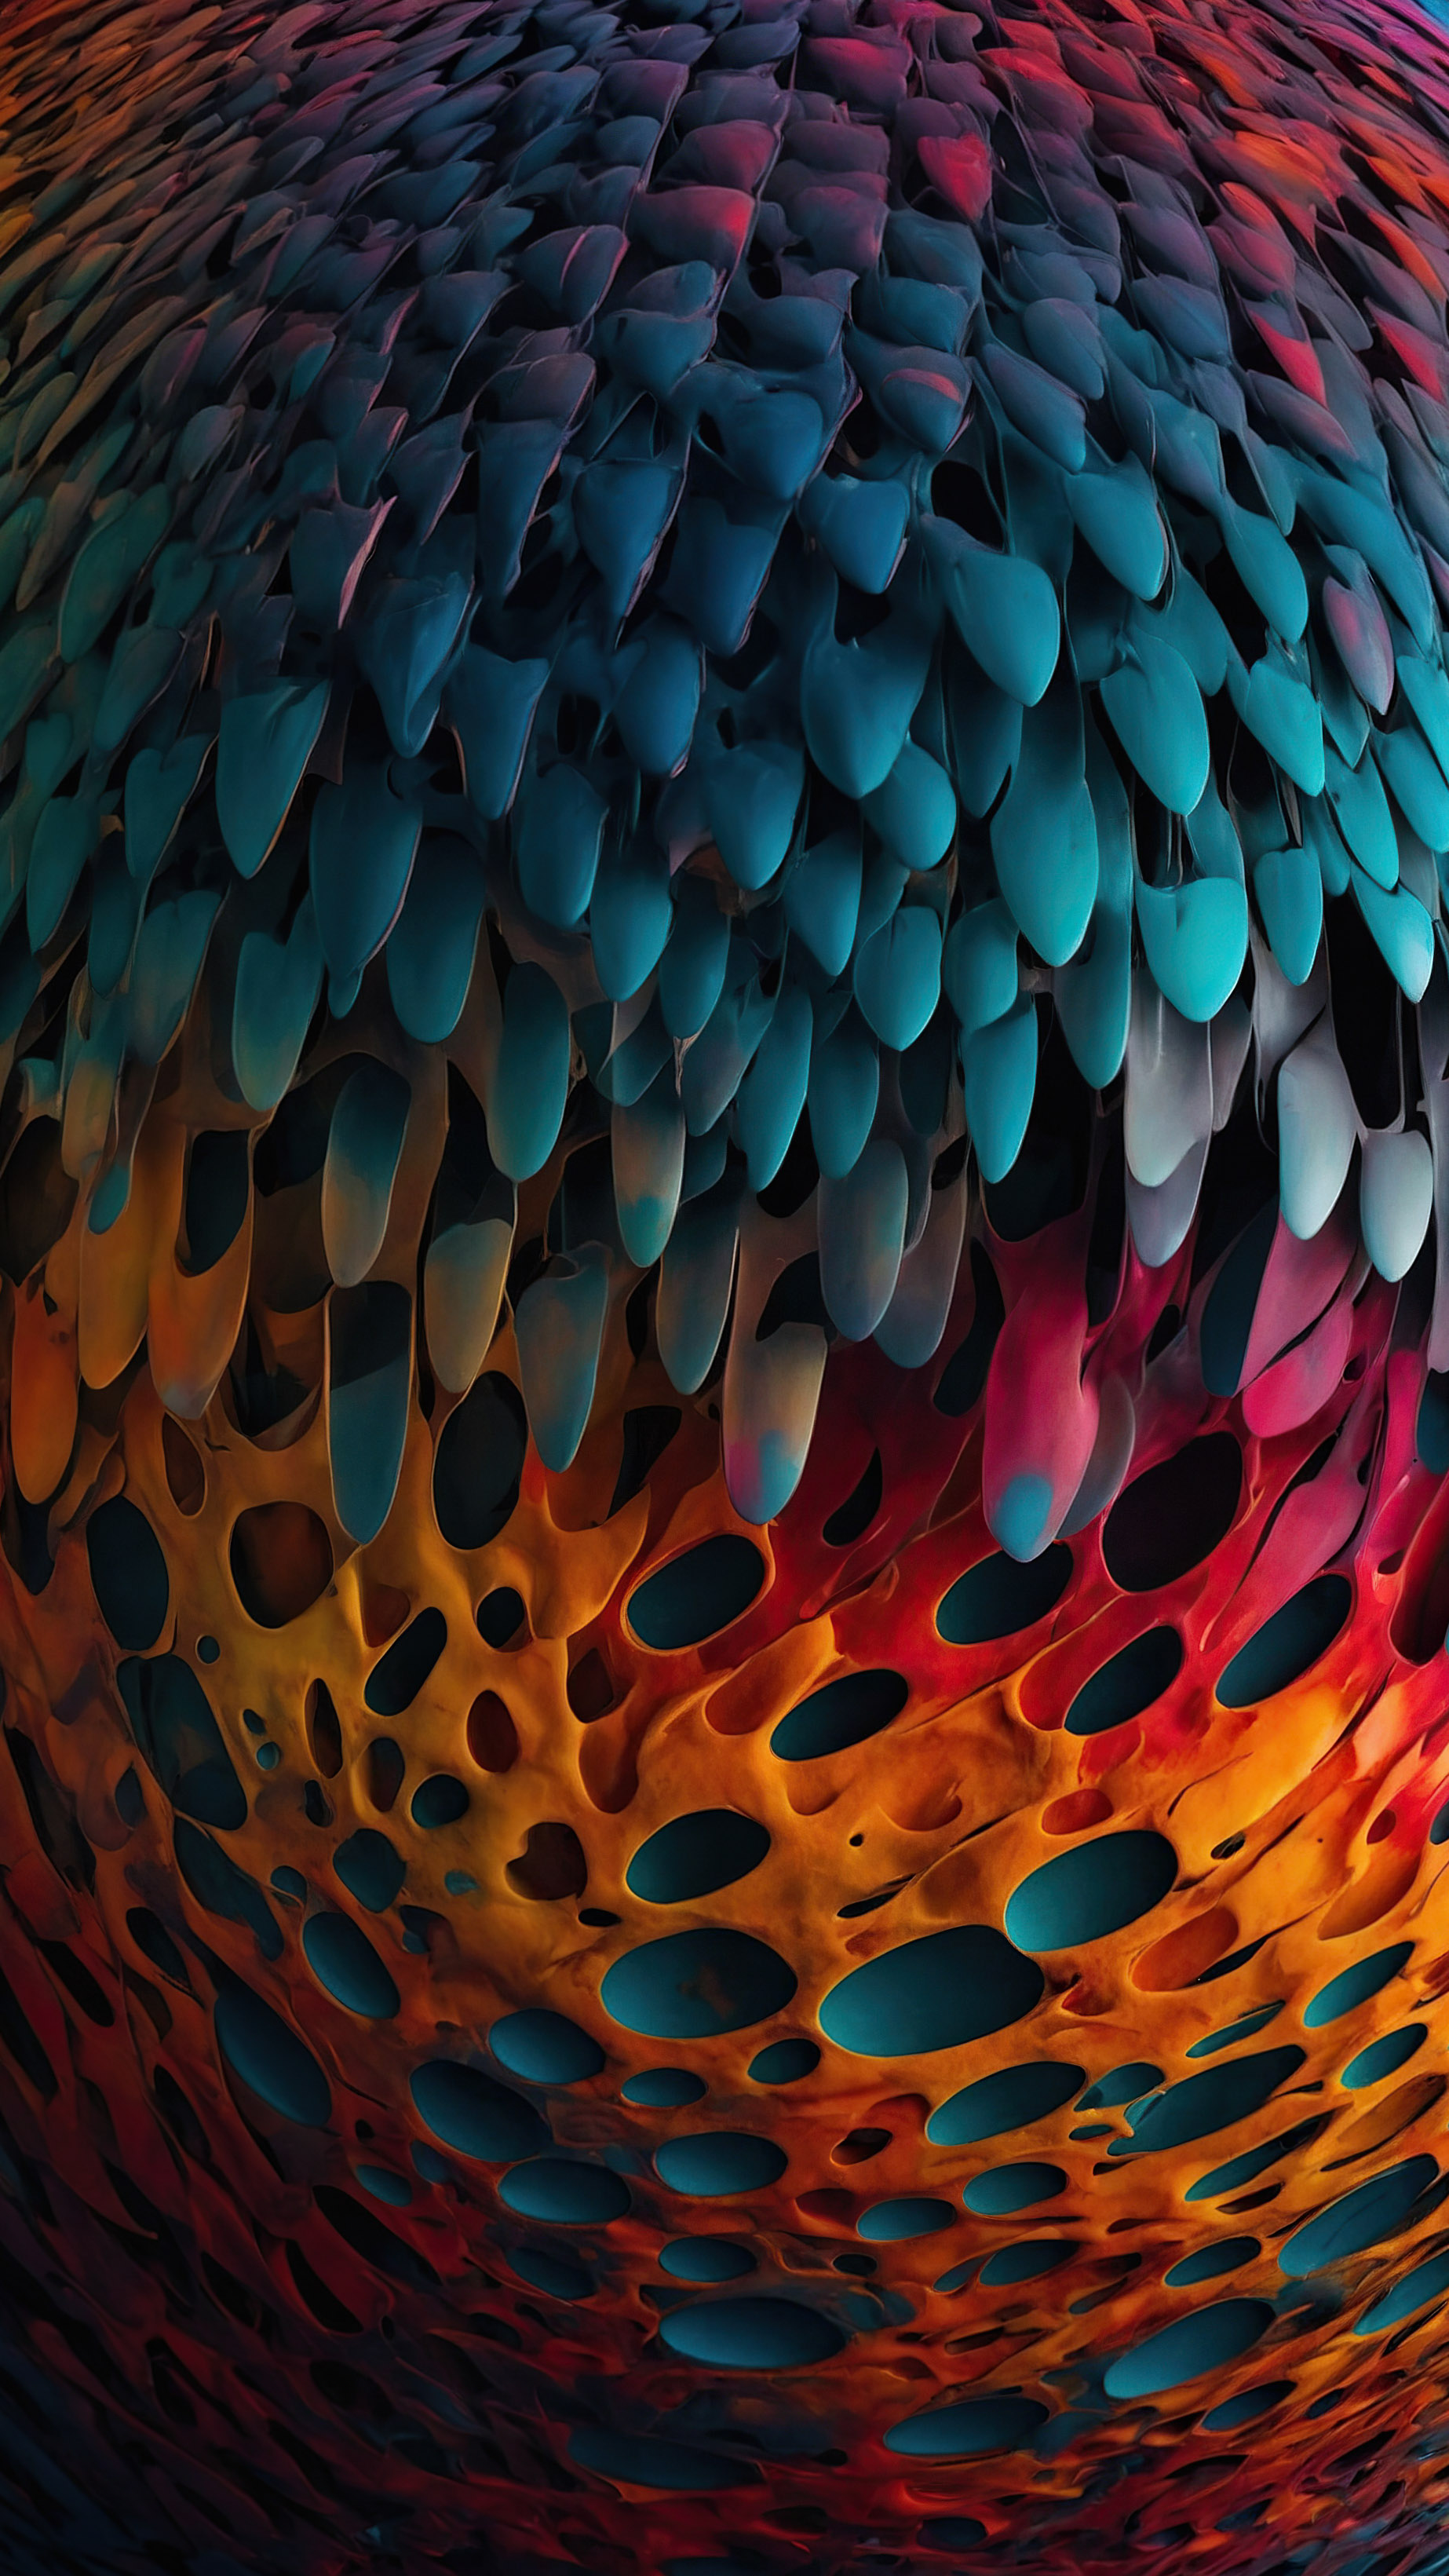 Experience the allure of our best iOS backgrounds, featuring a vibrant, multicolored sphere with an abstract, fluid-like pattern, set against a dark background, creating a visually striking and otherworldly effect.